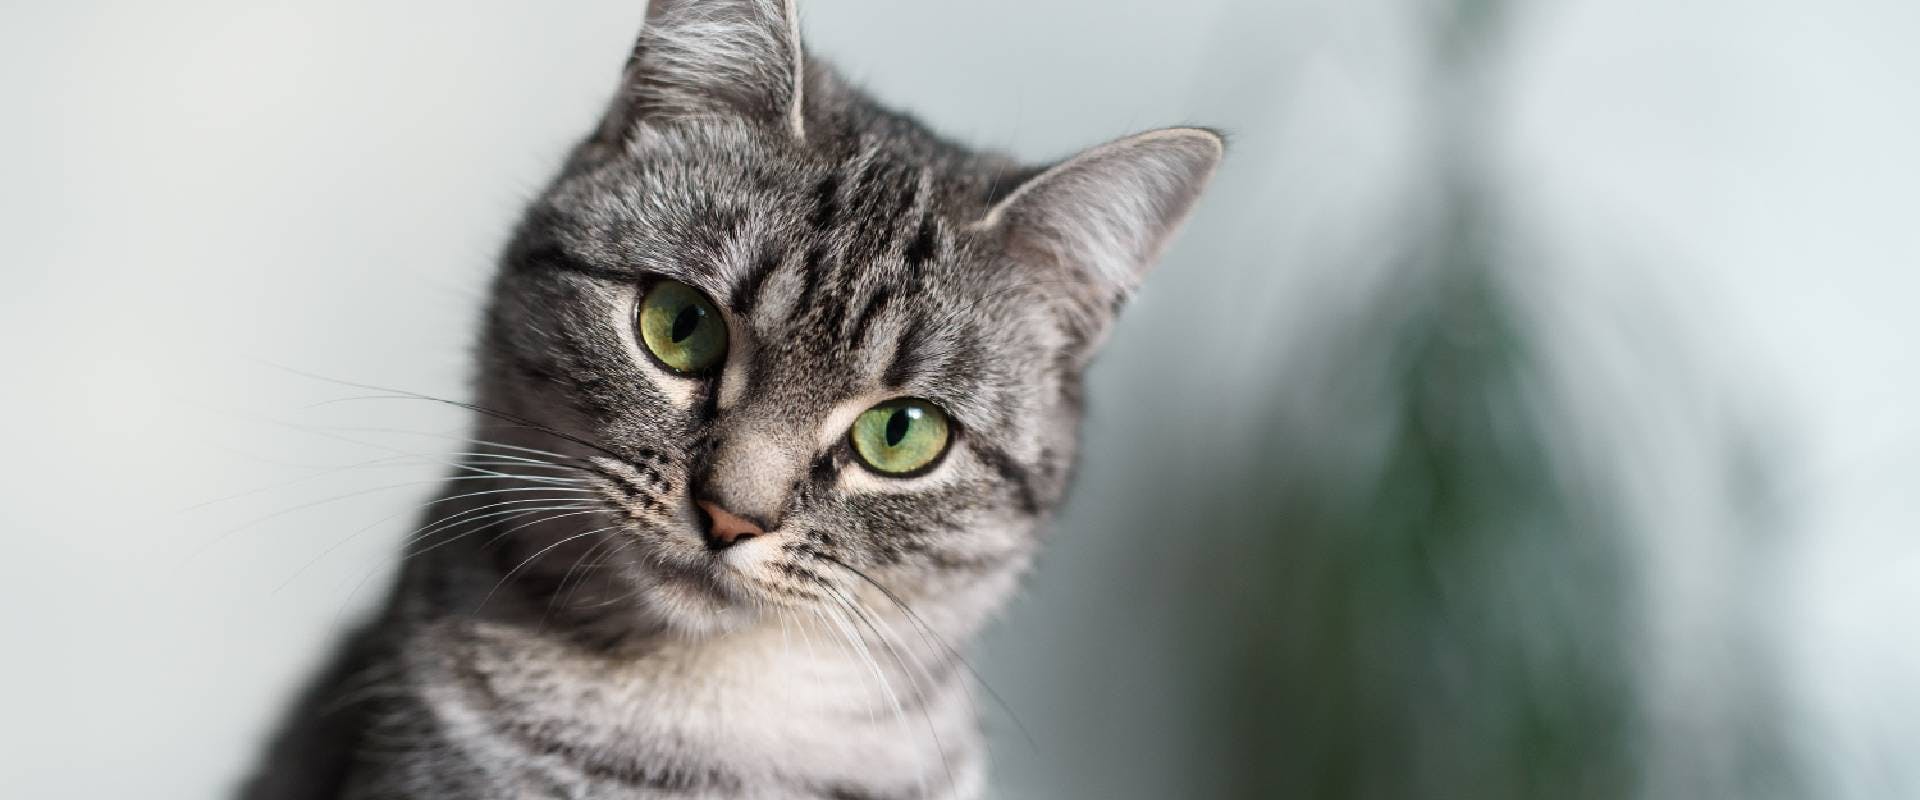 American Shorthair cat with green eyes